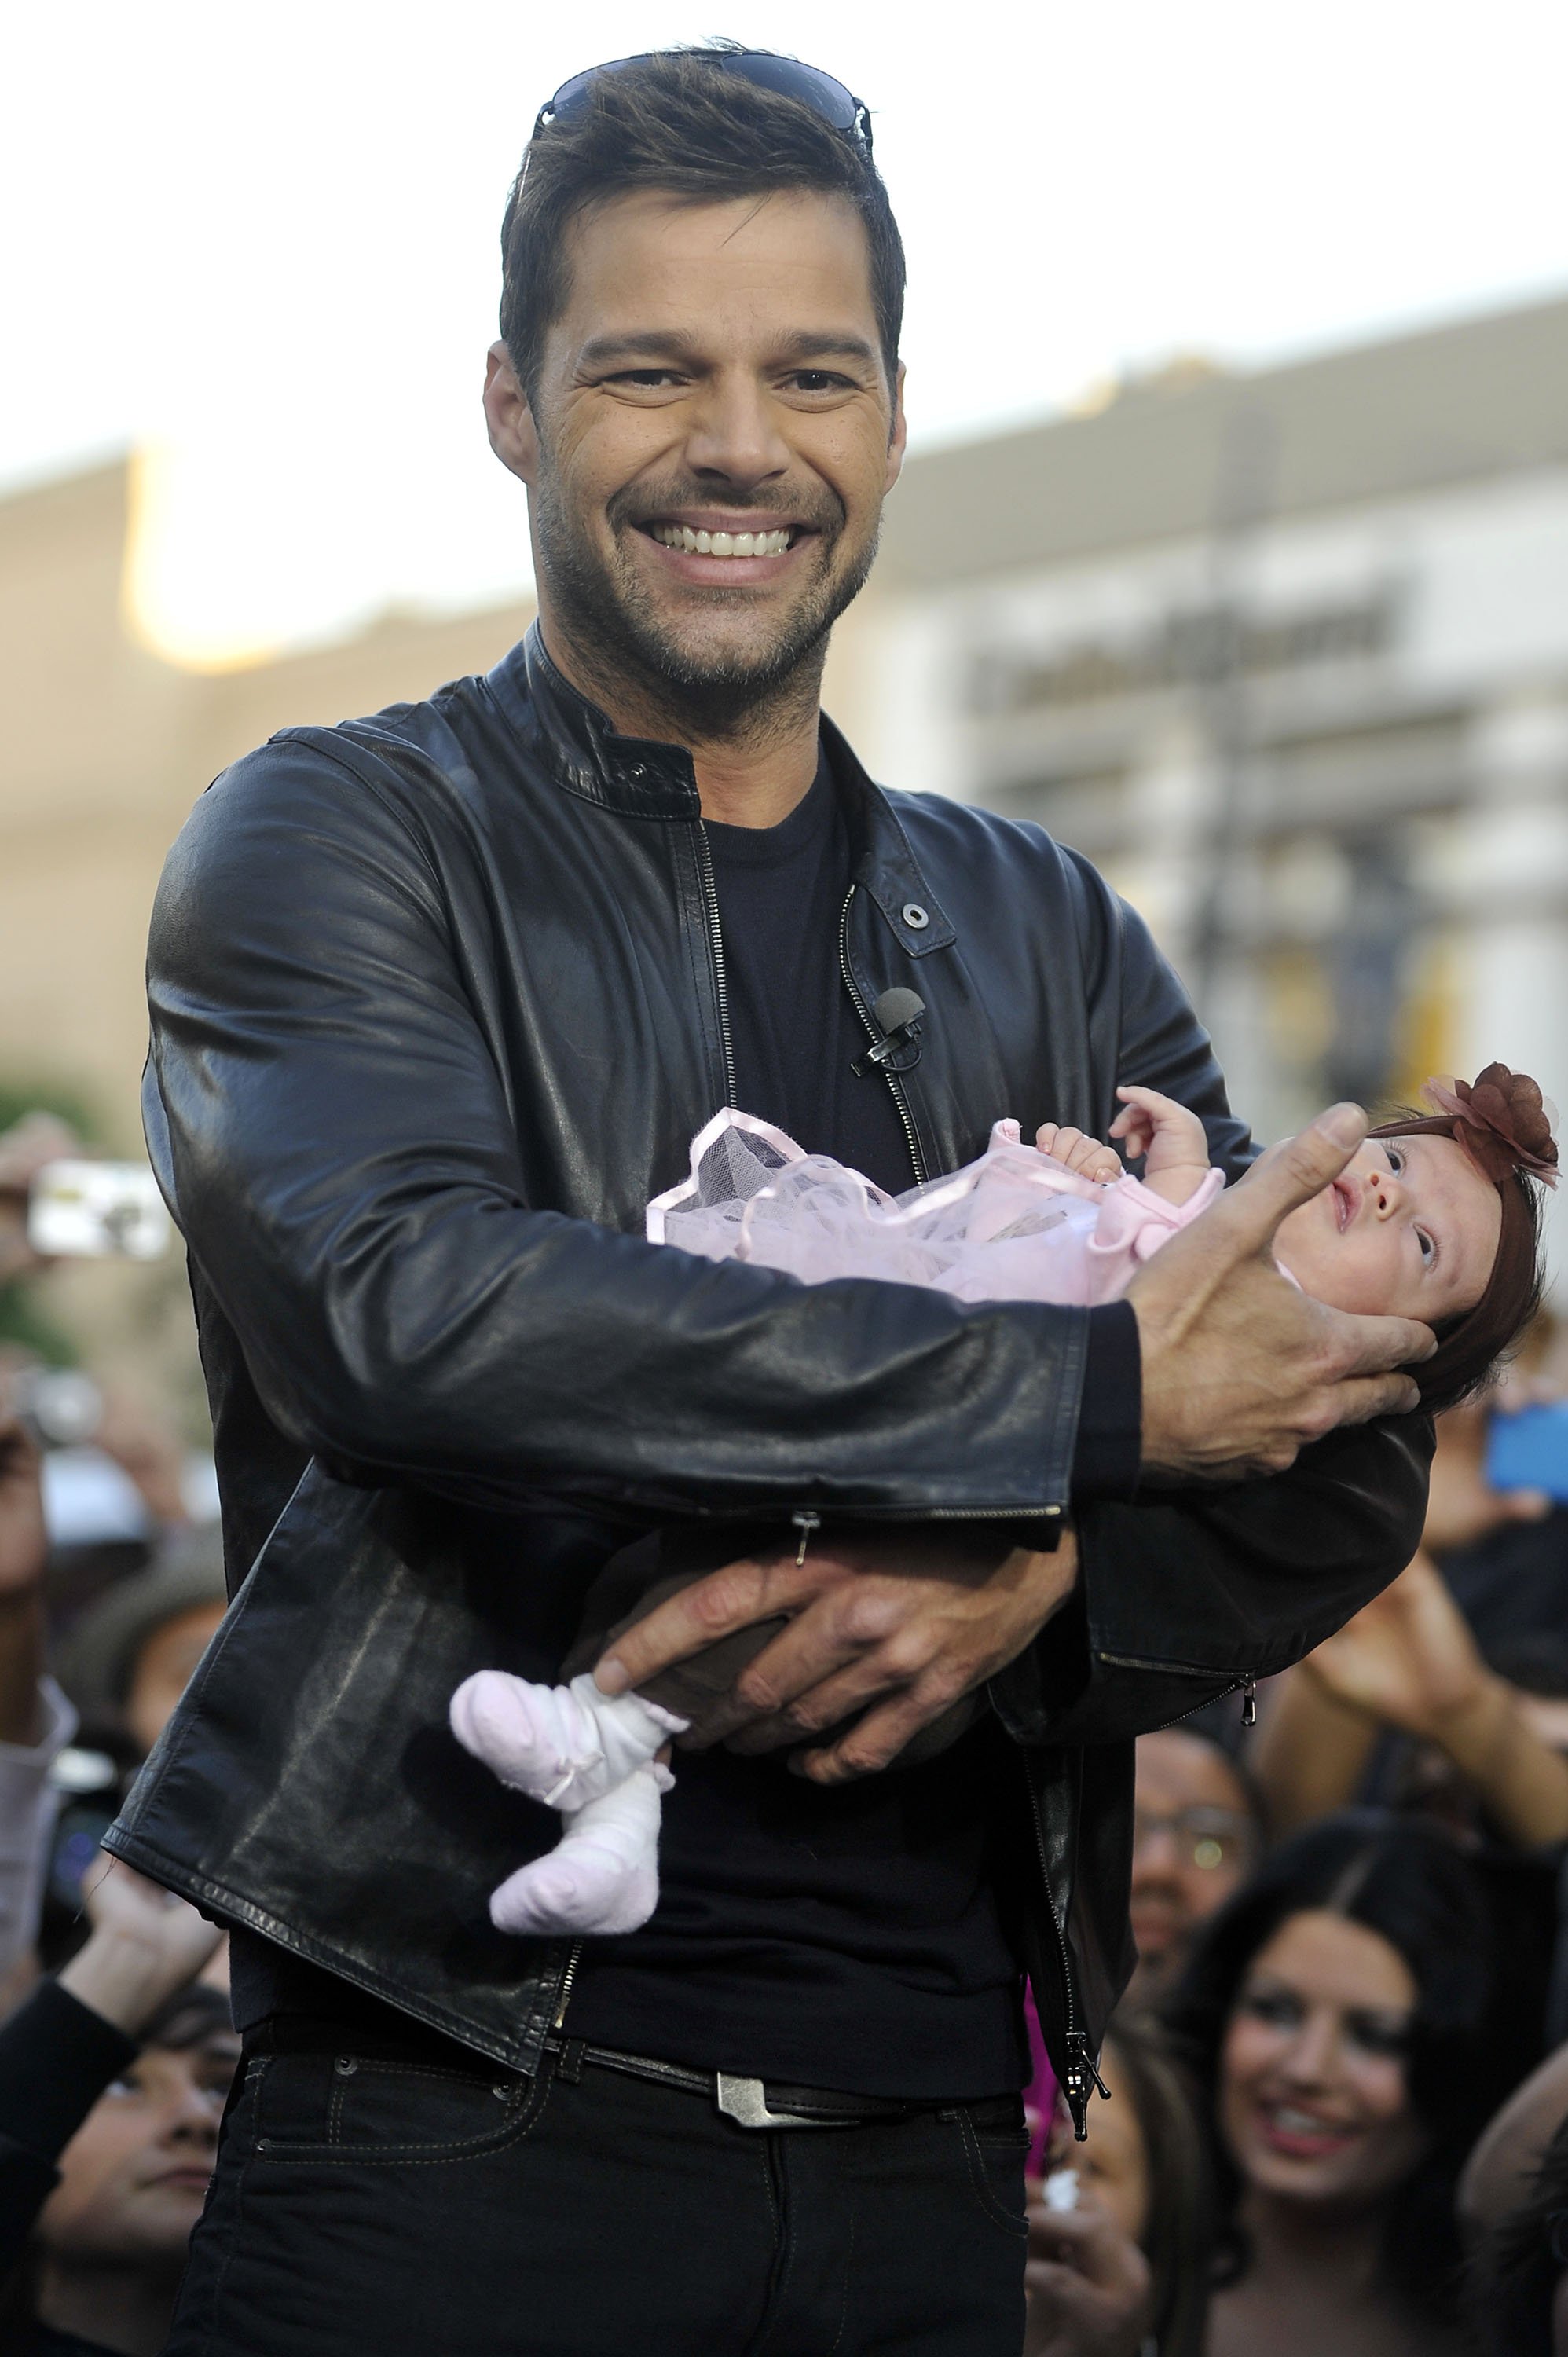 Ricky Martin cradles host Mario Lopez's daughter Gia Francesca on the set of the TV show "Extra" at The Grove on November 9, 2010, in Los Angeles, California. | Source: Getty Images